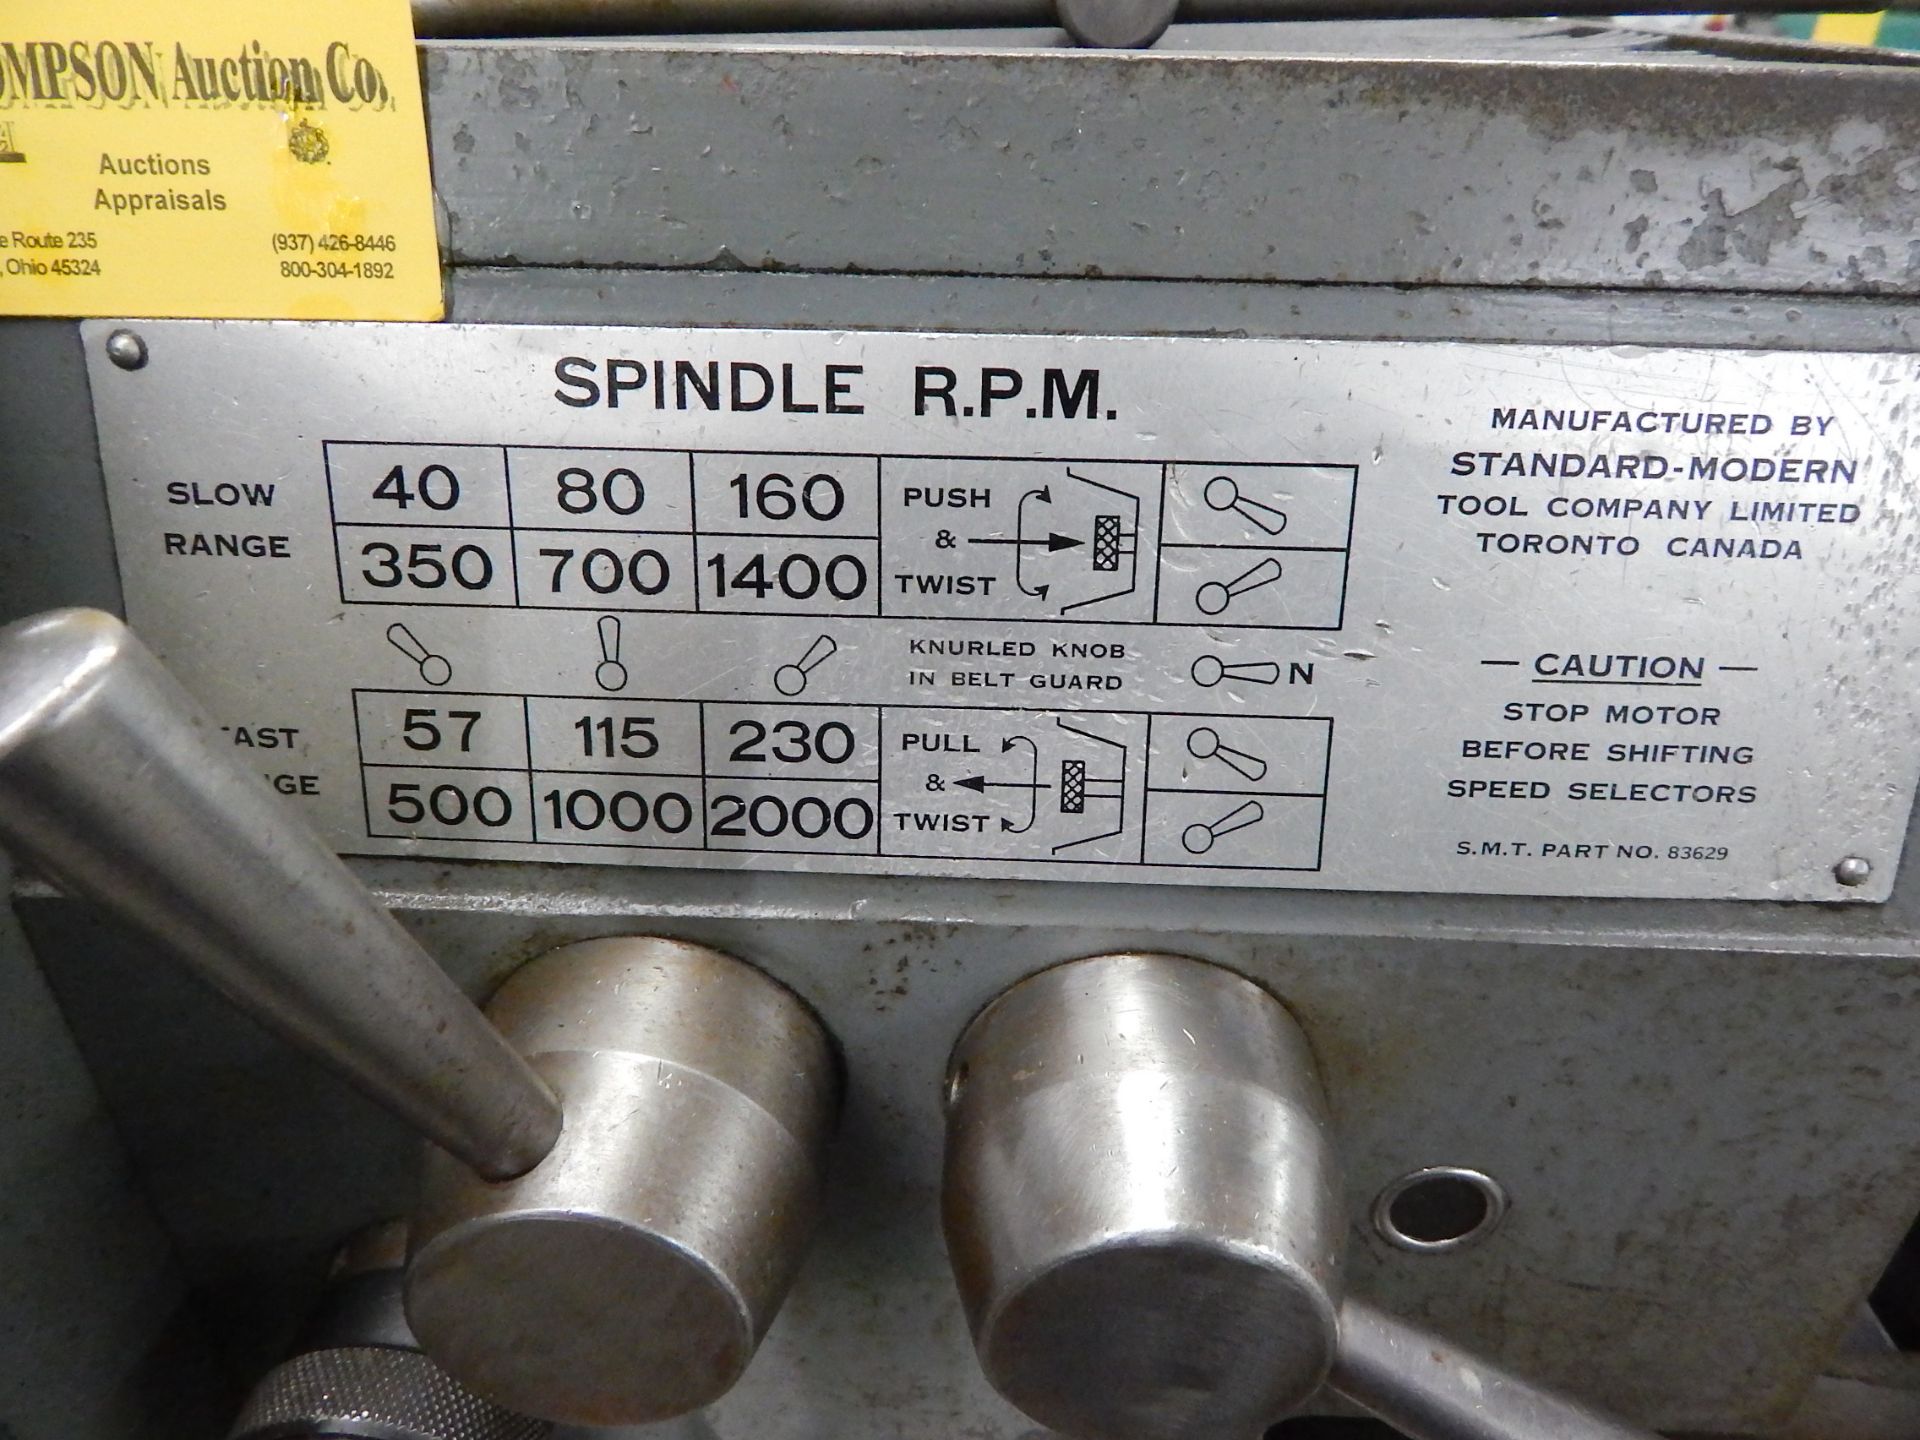 Standard Modern Model 1340 tool Room Lathe, SN 8812, 13" x 40", Taper Attachment, 8" 6-Jaw Chuck - Image 6 of 14